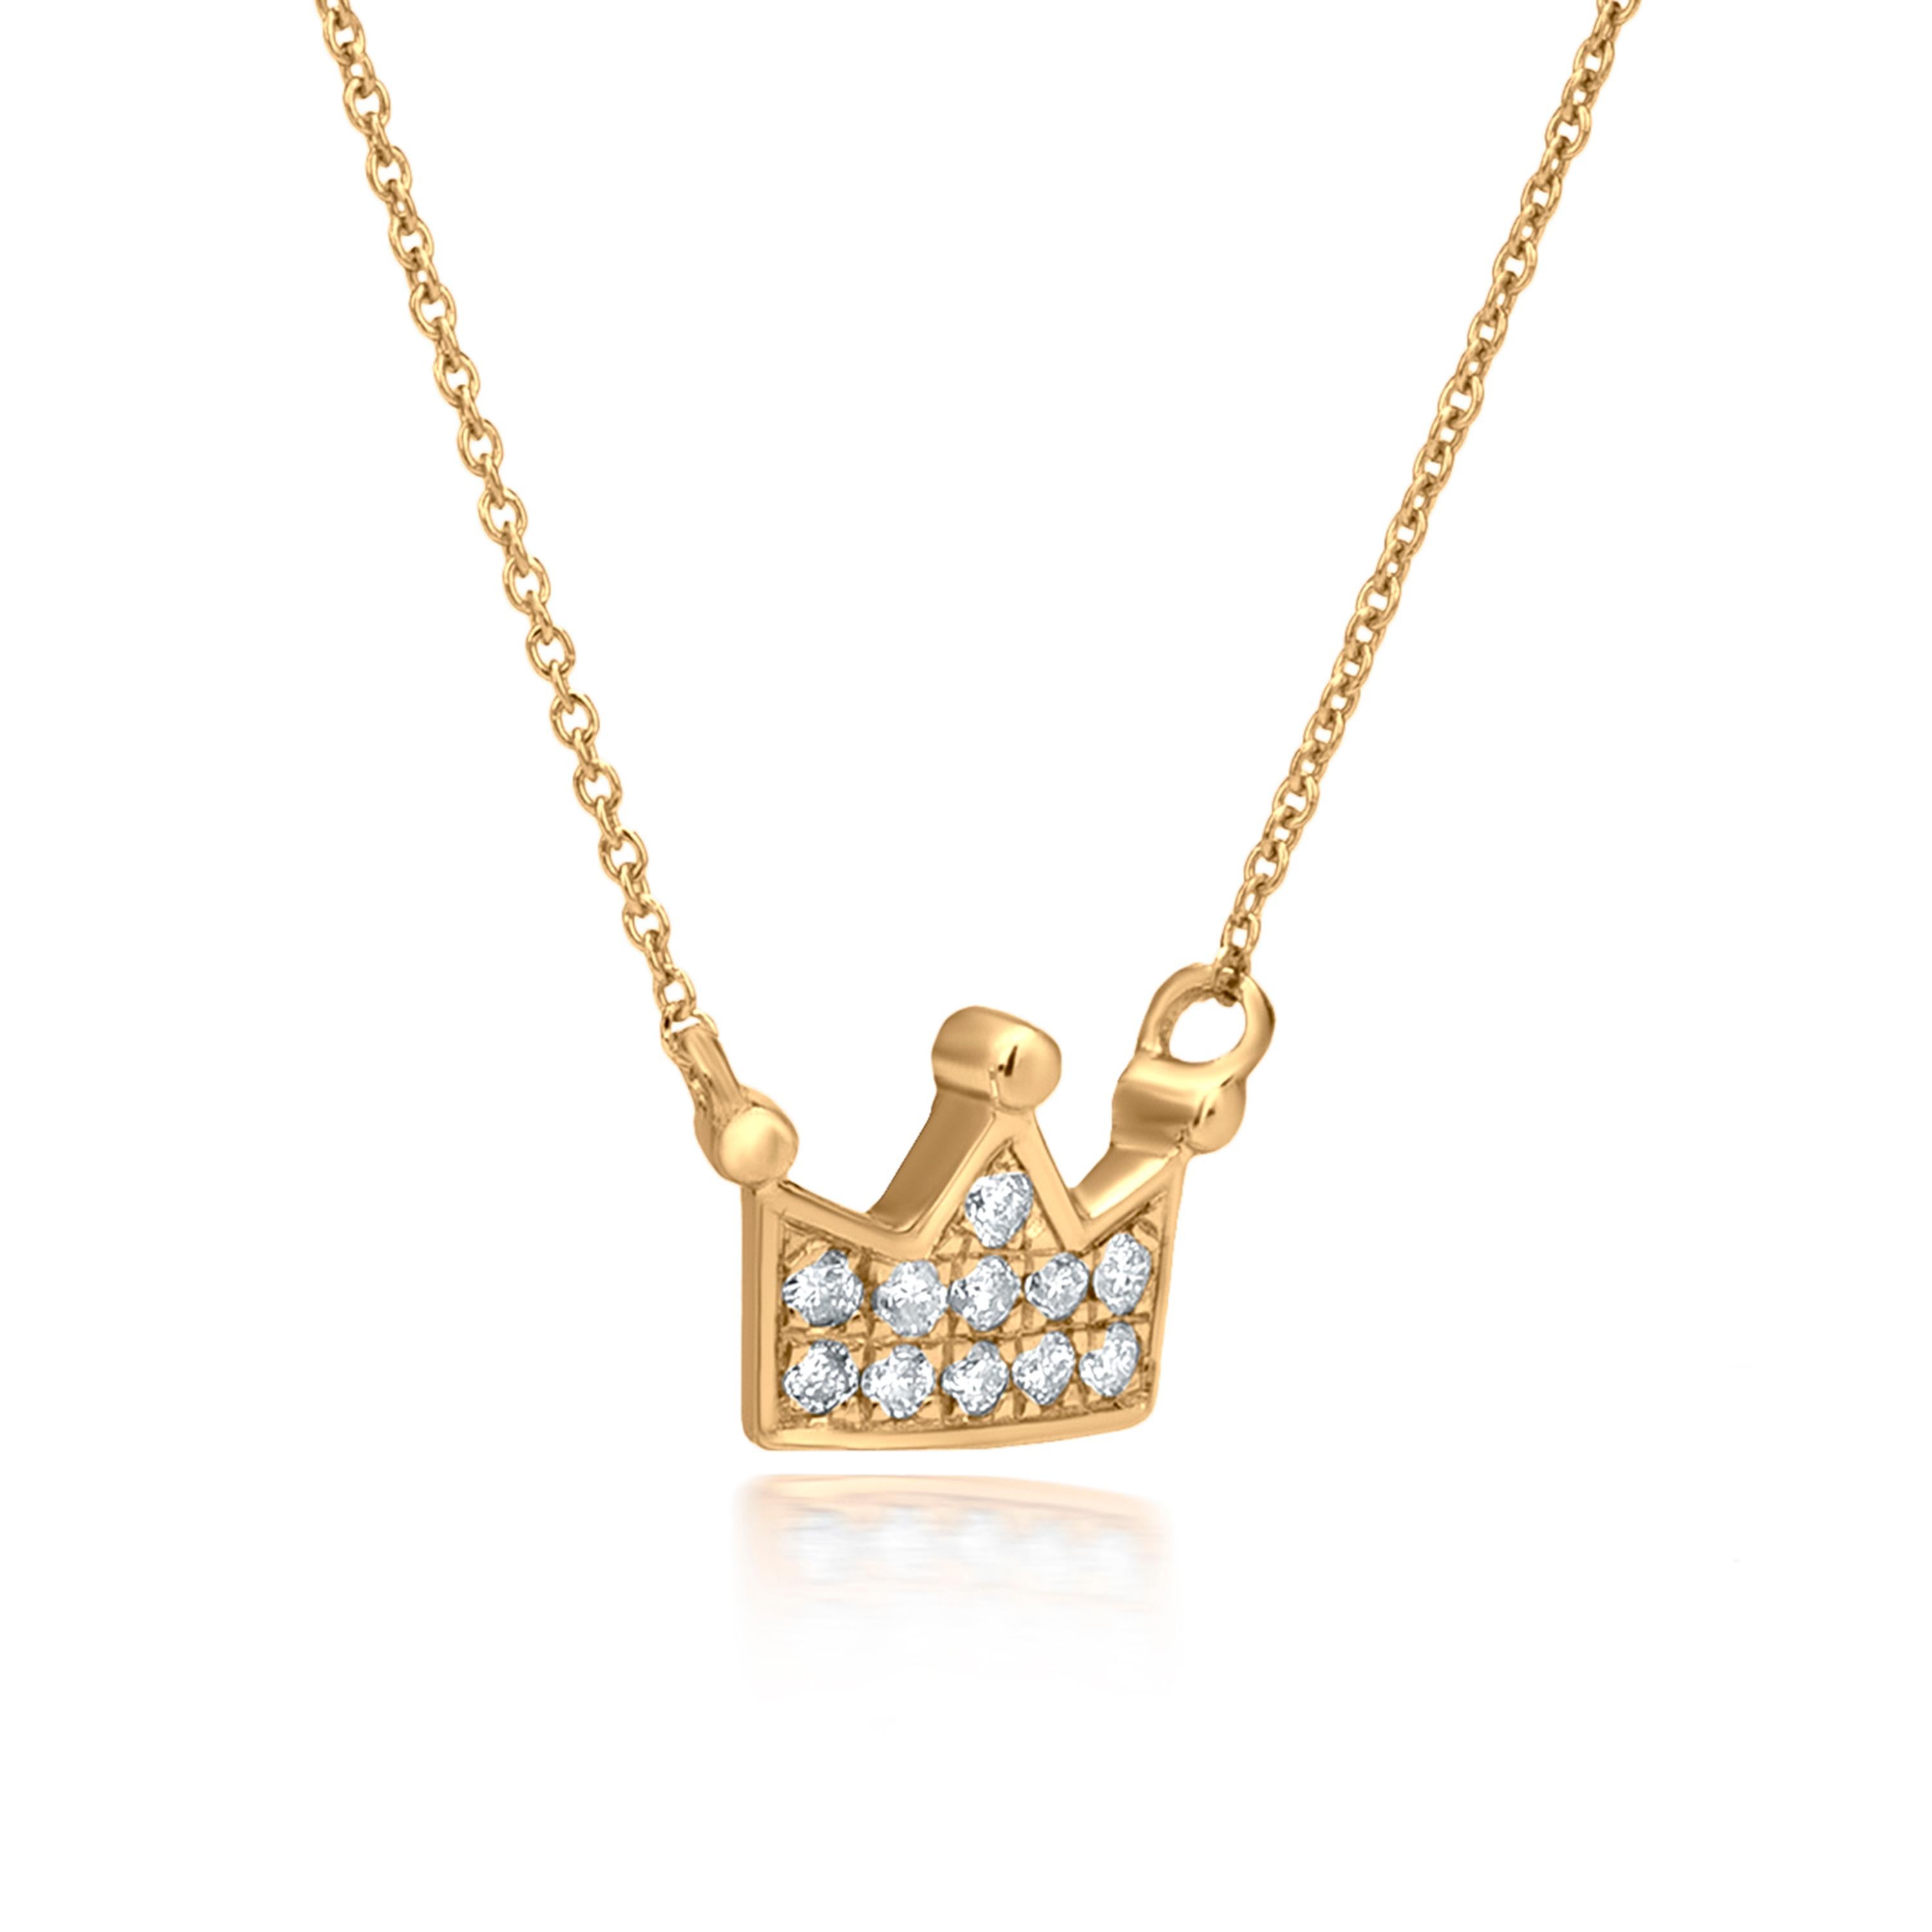 Contemporary Luxle Crown Diamond Pendant Necklace in 18K Yellow Gold